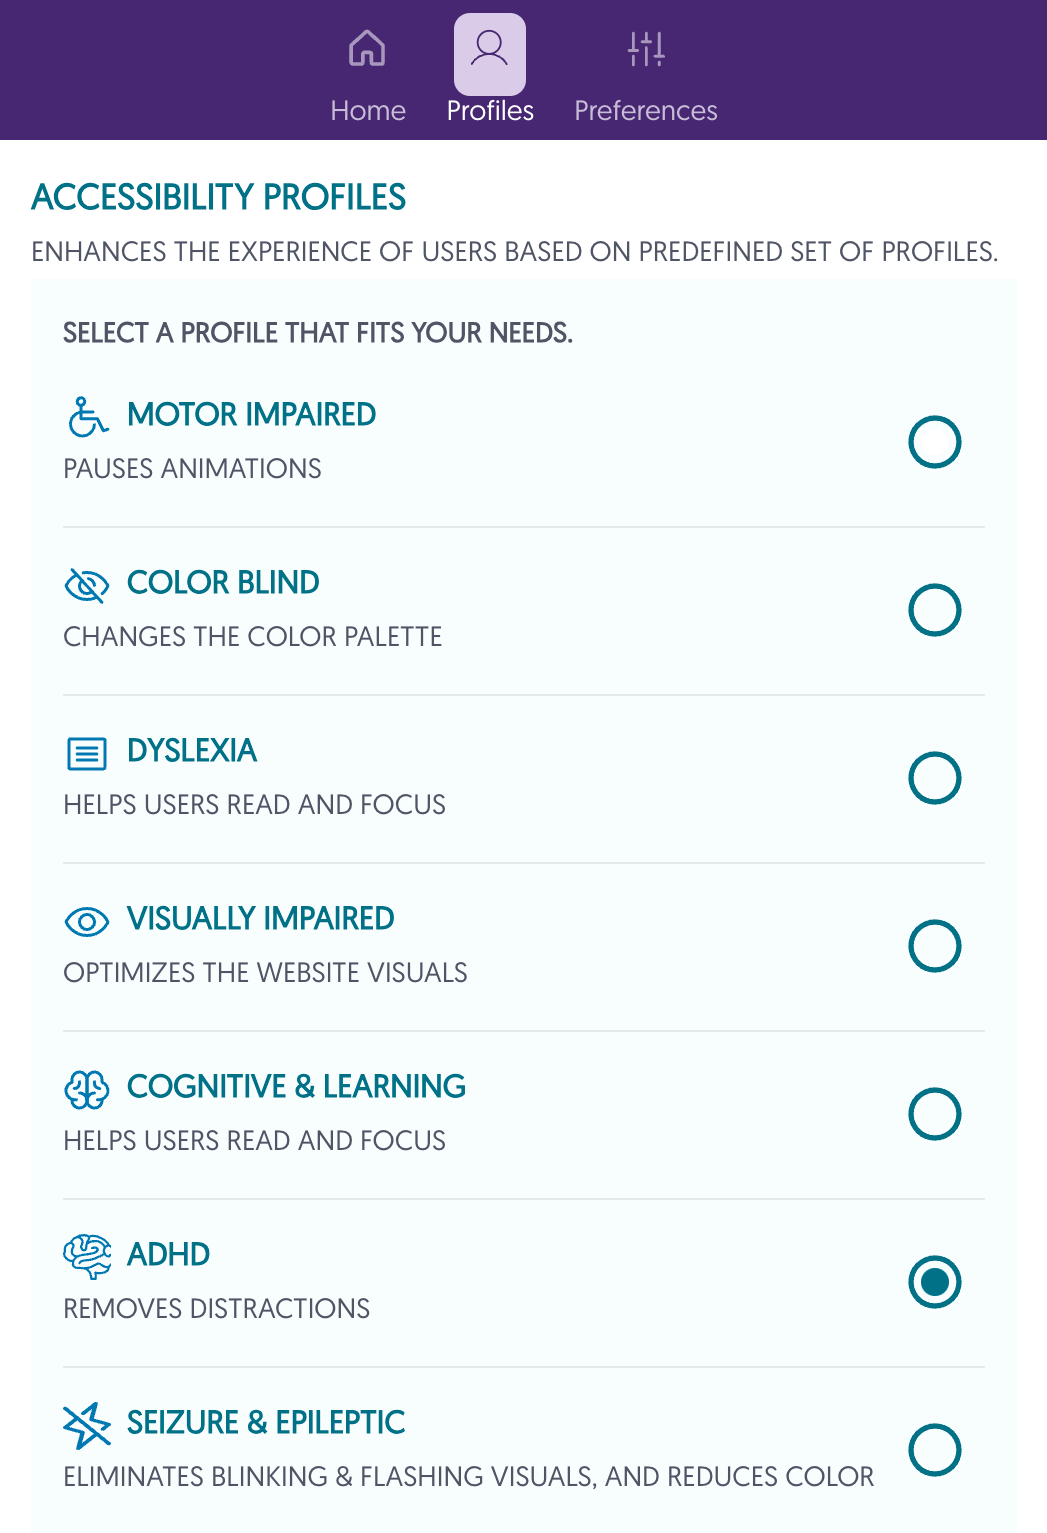 pop-up of adhd accessibility profile options.